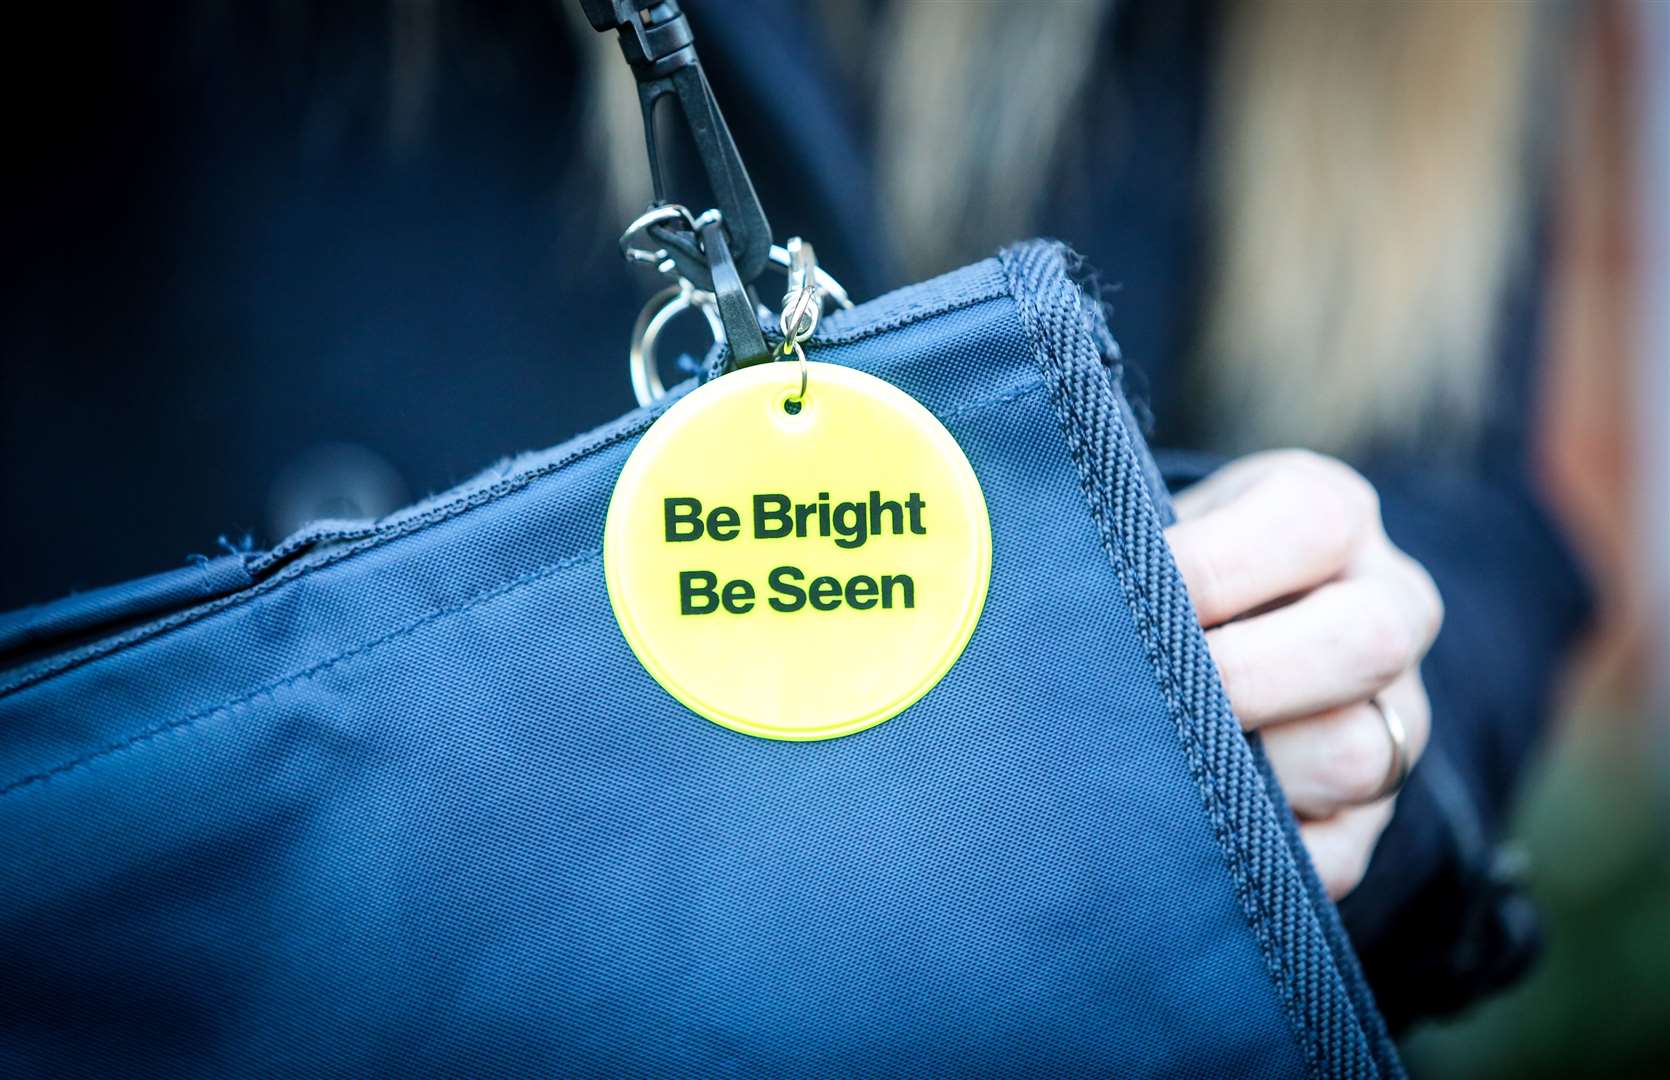 Keyrings can be attached to bags or coats to help children remain visible